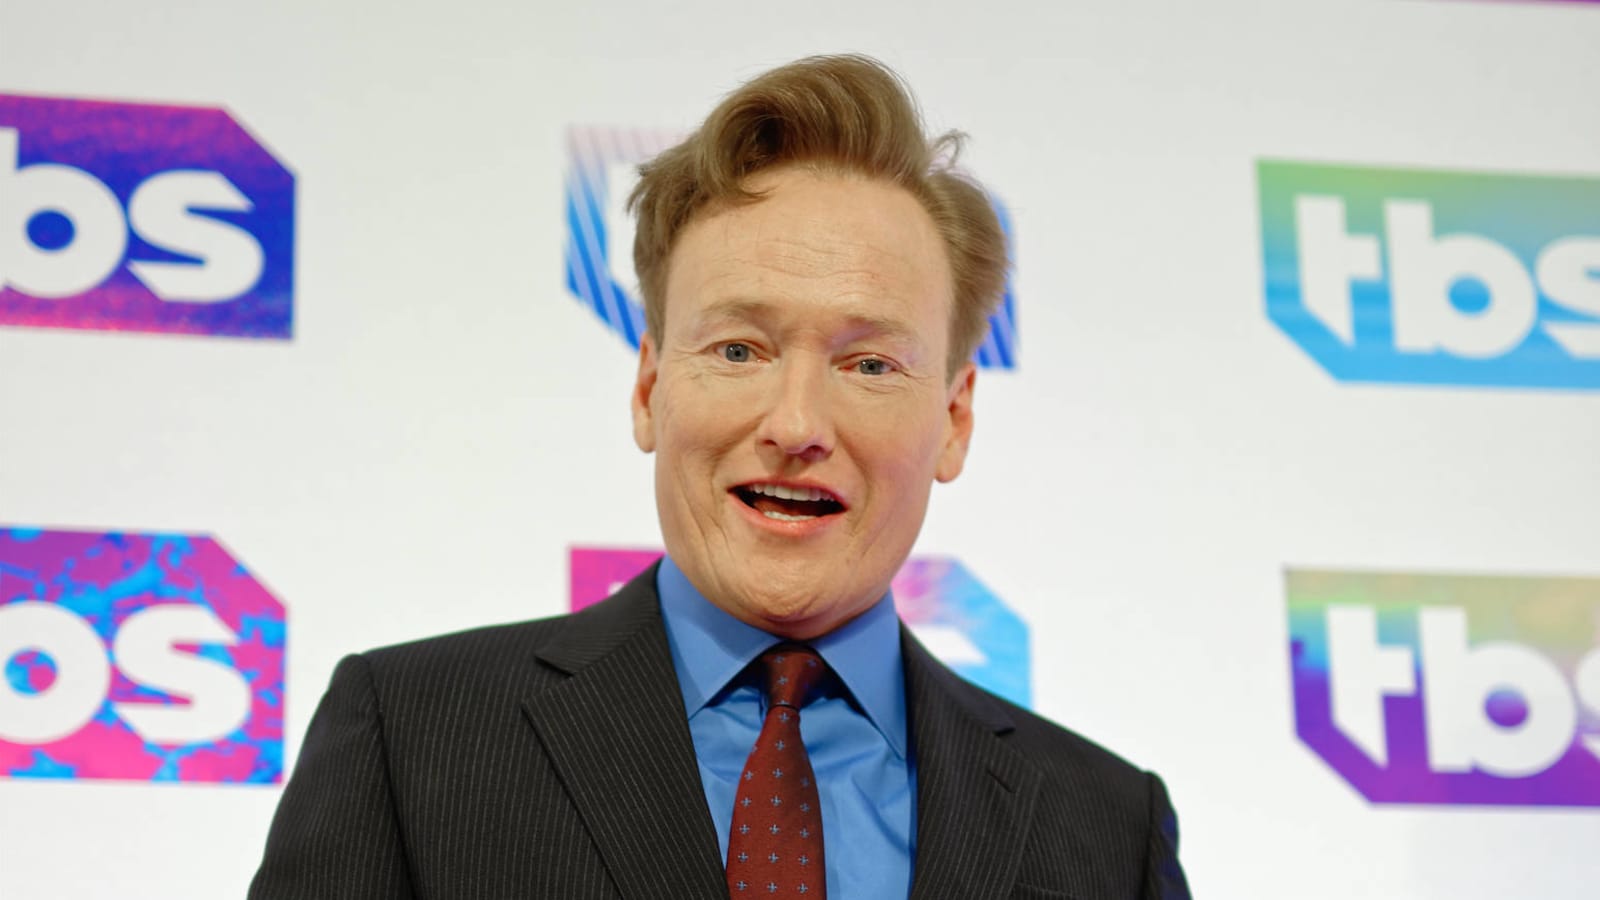 Conan O'Brien confirms 'Conan' will end in June and teases what's next